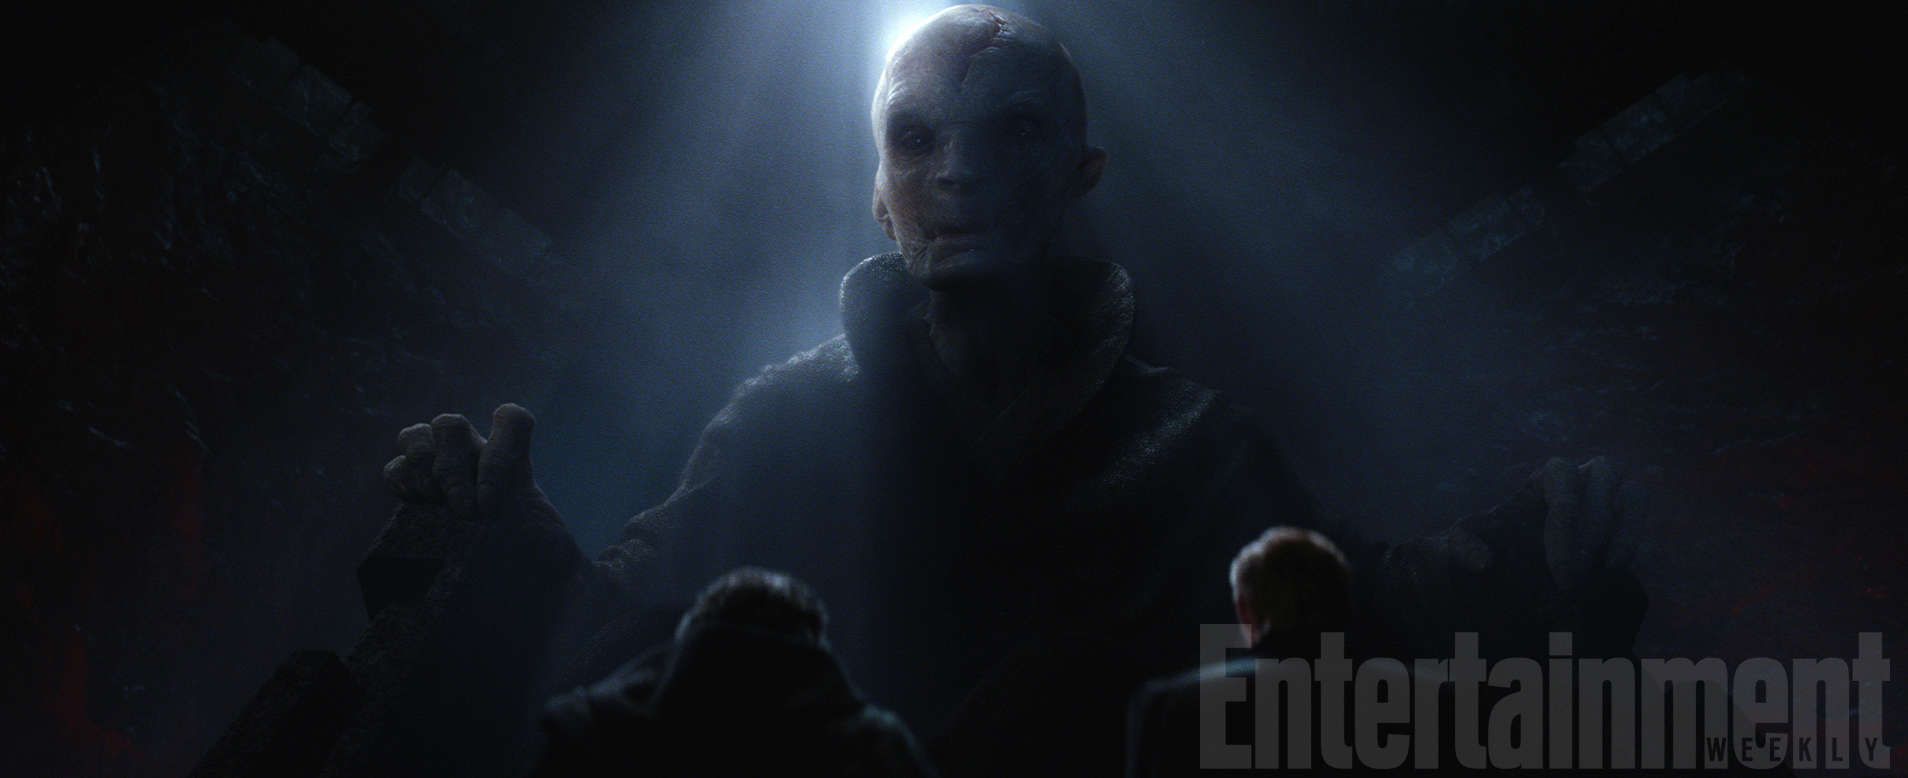 More Official Image Of Supreme Leader Snoke From Star Wars: The Force Awakens Hit!. Making Star Wars